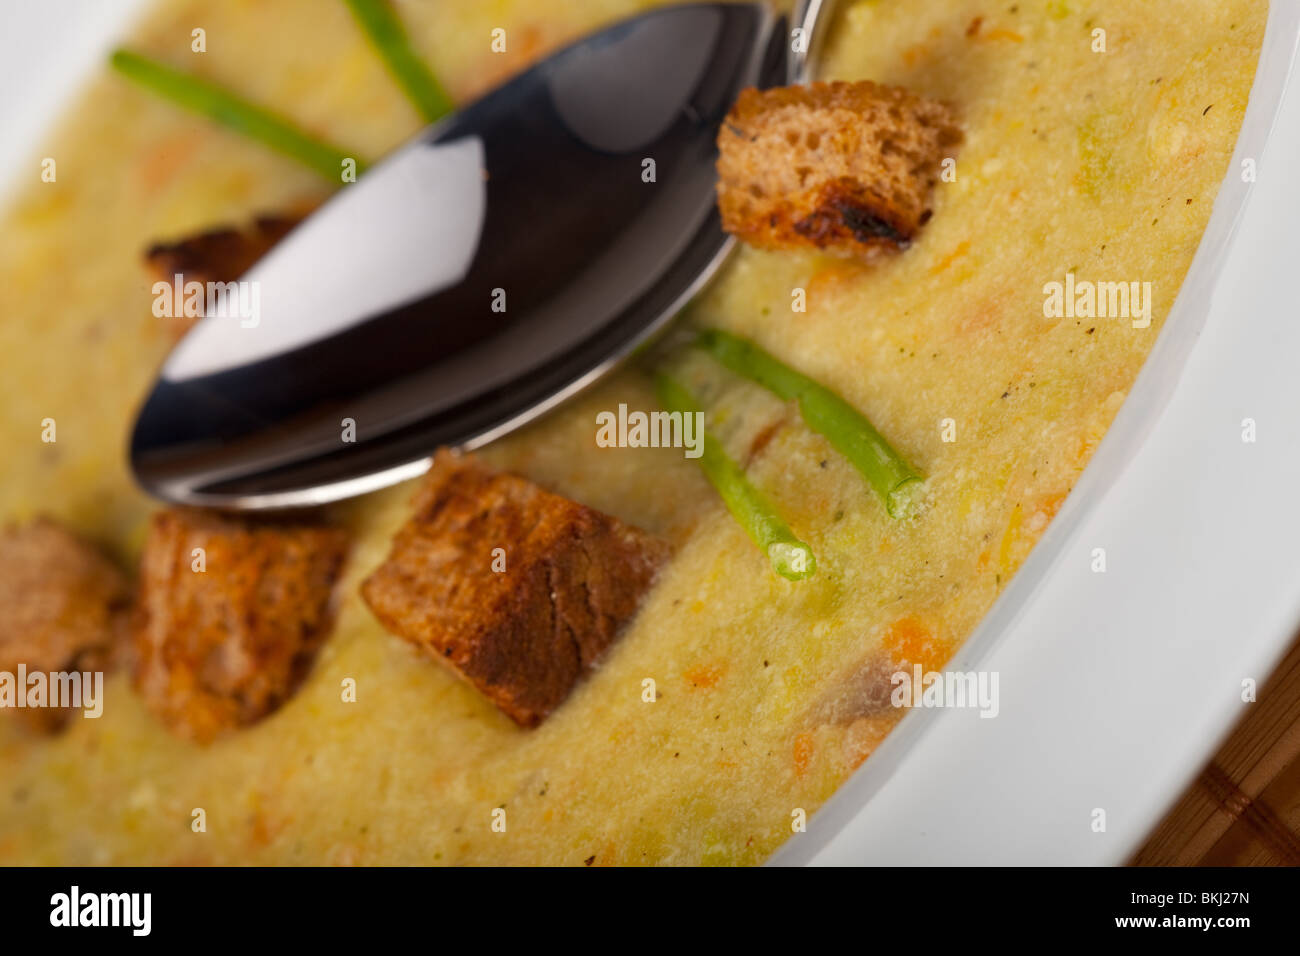 potato soup with croutons and chive strands Stock Photo